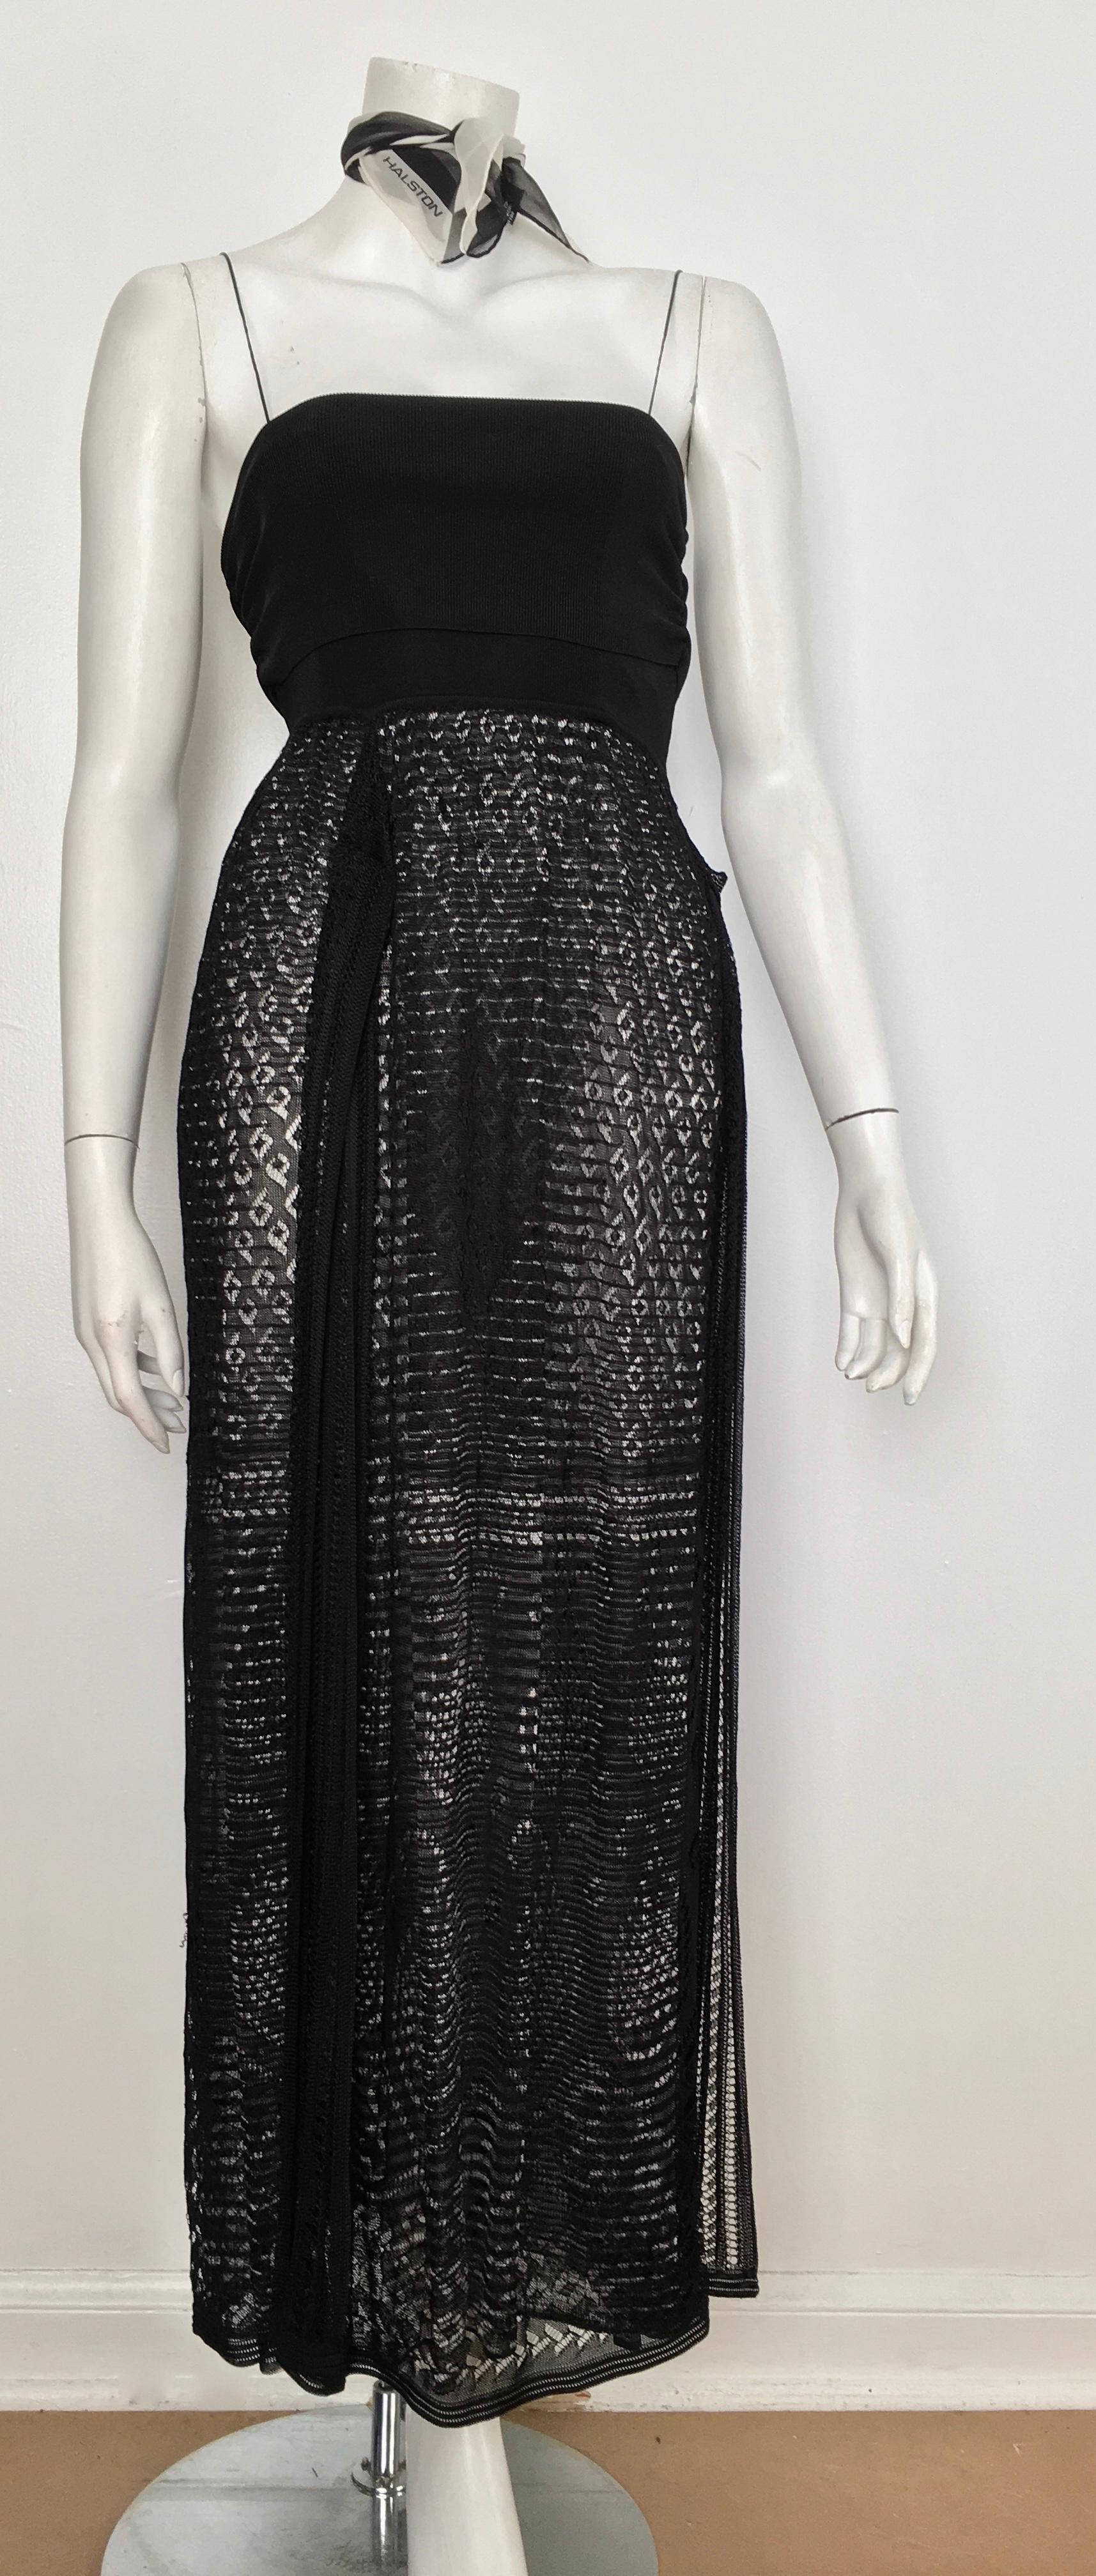 M by Missoni lace black & white spaghetti strap maxi dress is an Italian size 42 and fits like an USA size 4. This fits Matilda the Mannequin perfectly and she wears a size 4, so if you have the identical body type as Matilda then this was meant for